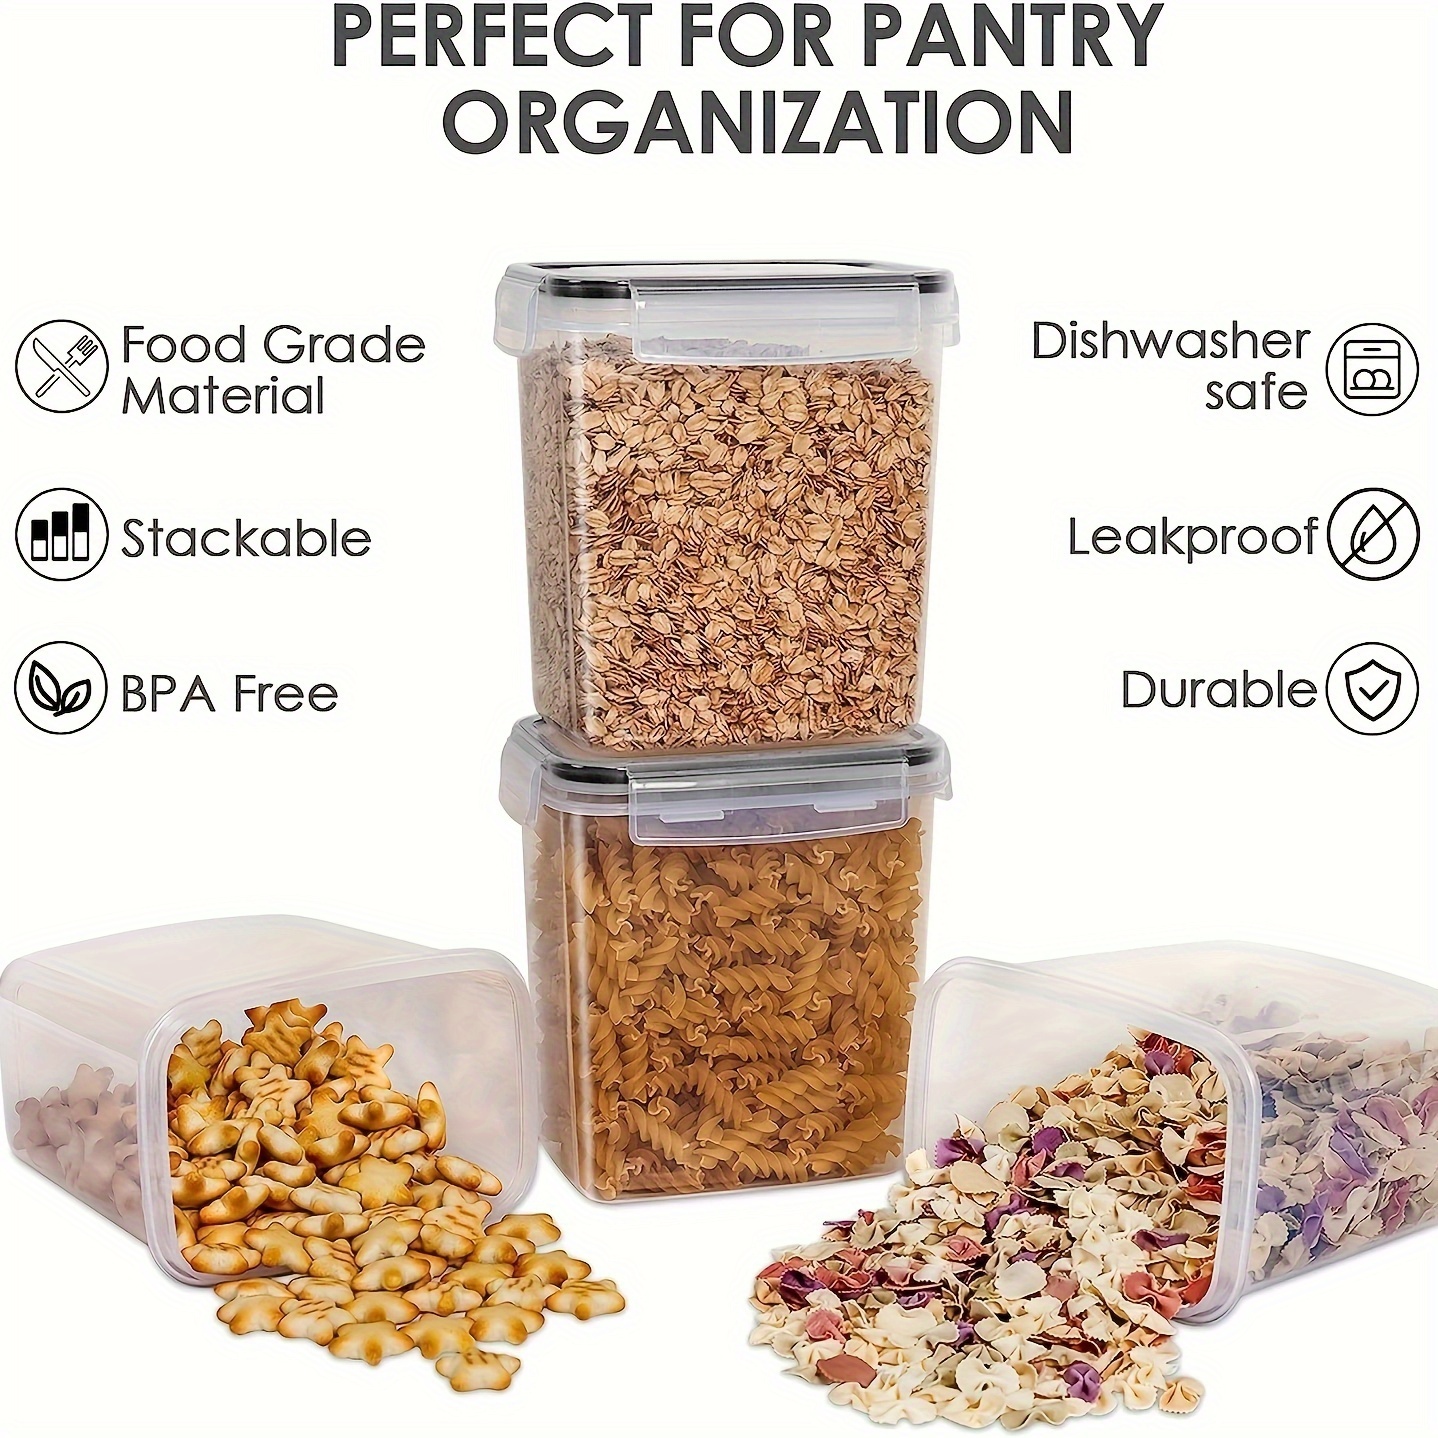 Airtight Food Storage Containers Set 15Pcs With Lids, Cereal Flour